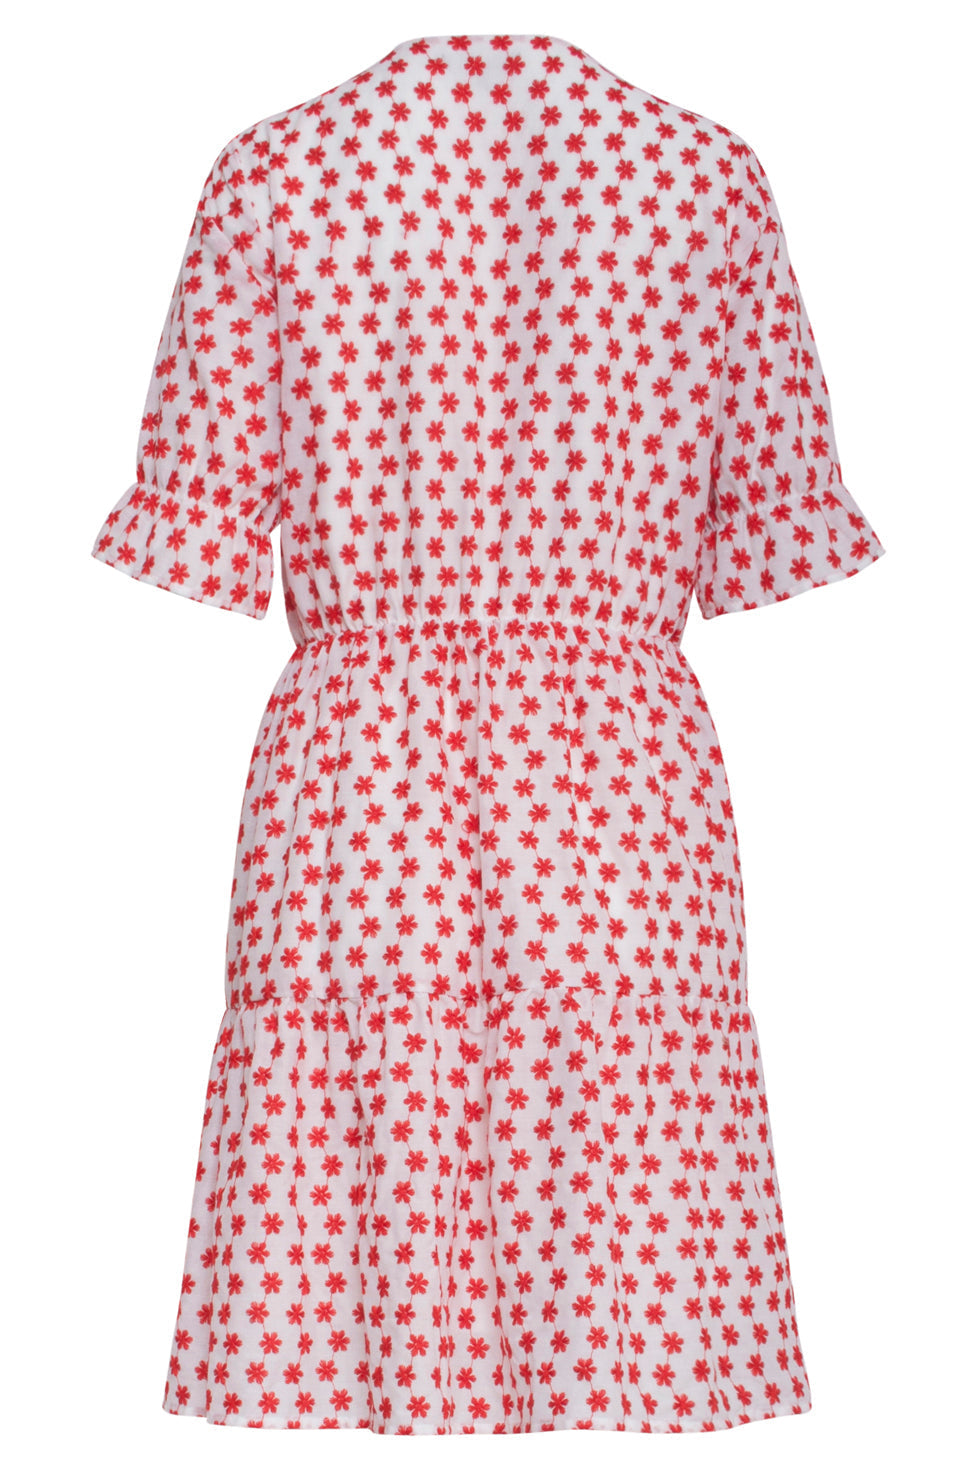 23066 White-Red Floral Block Printed Above Knee Dress